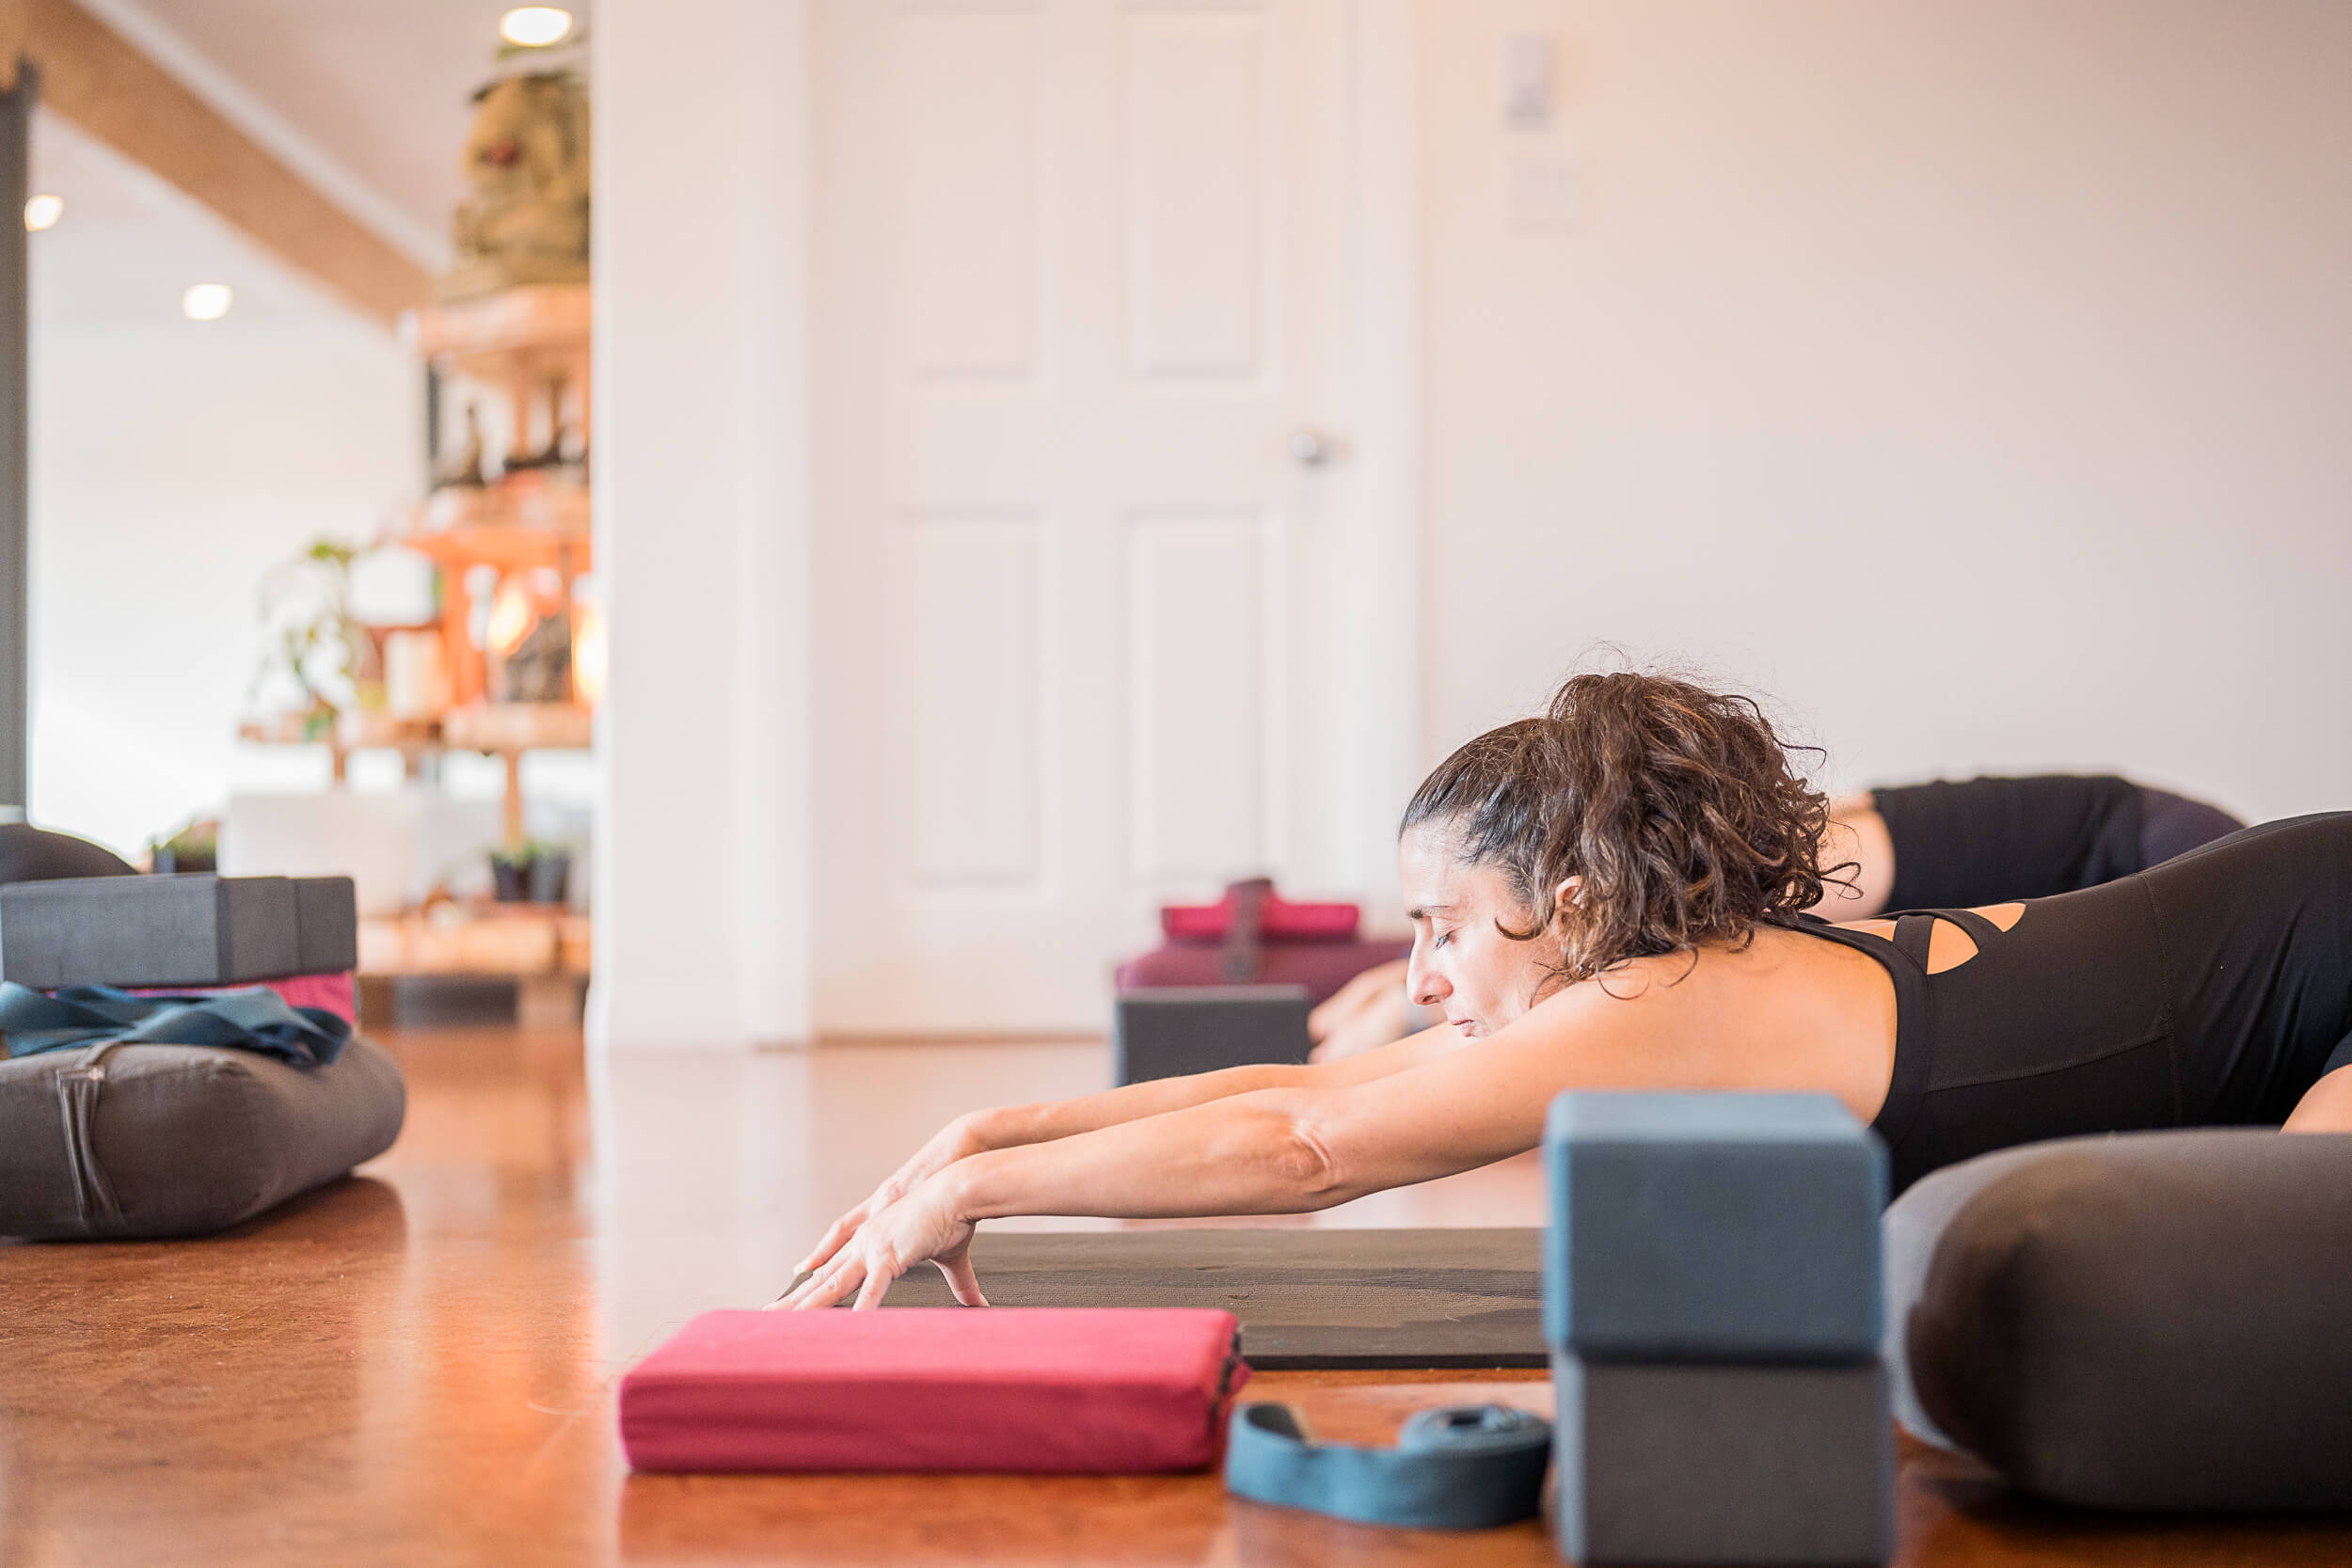 A focused yogi engages in a forward stretch at Shala Yoga in Squamish, demonstrating the quiet dedication that the studio nurtures in its tranquil environment, complete with warm wooden floors and a backdrop of yoga props that assist in the practice.